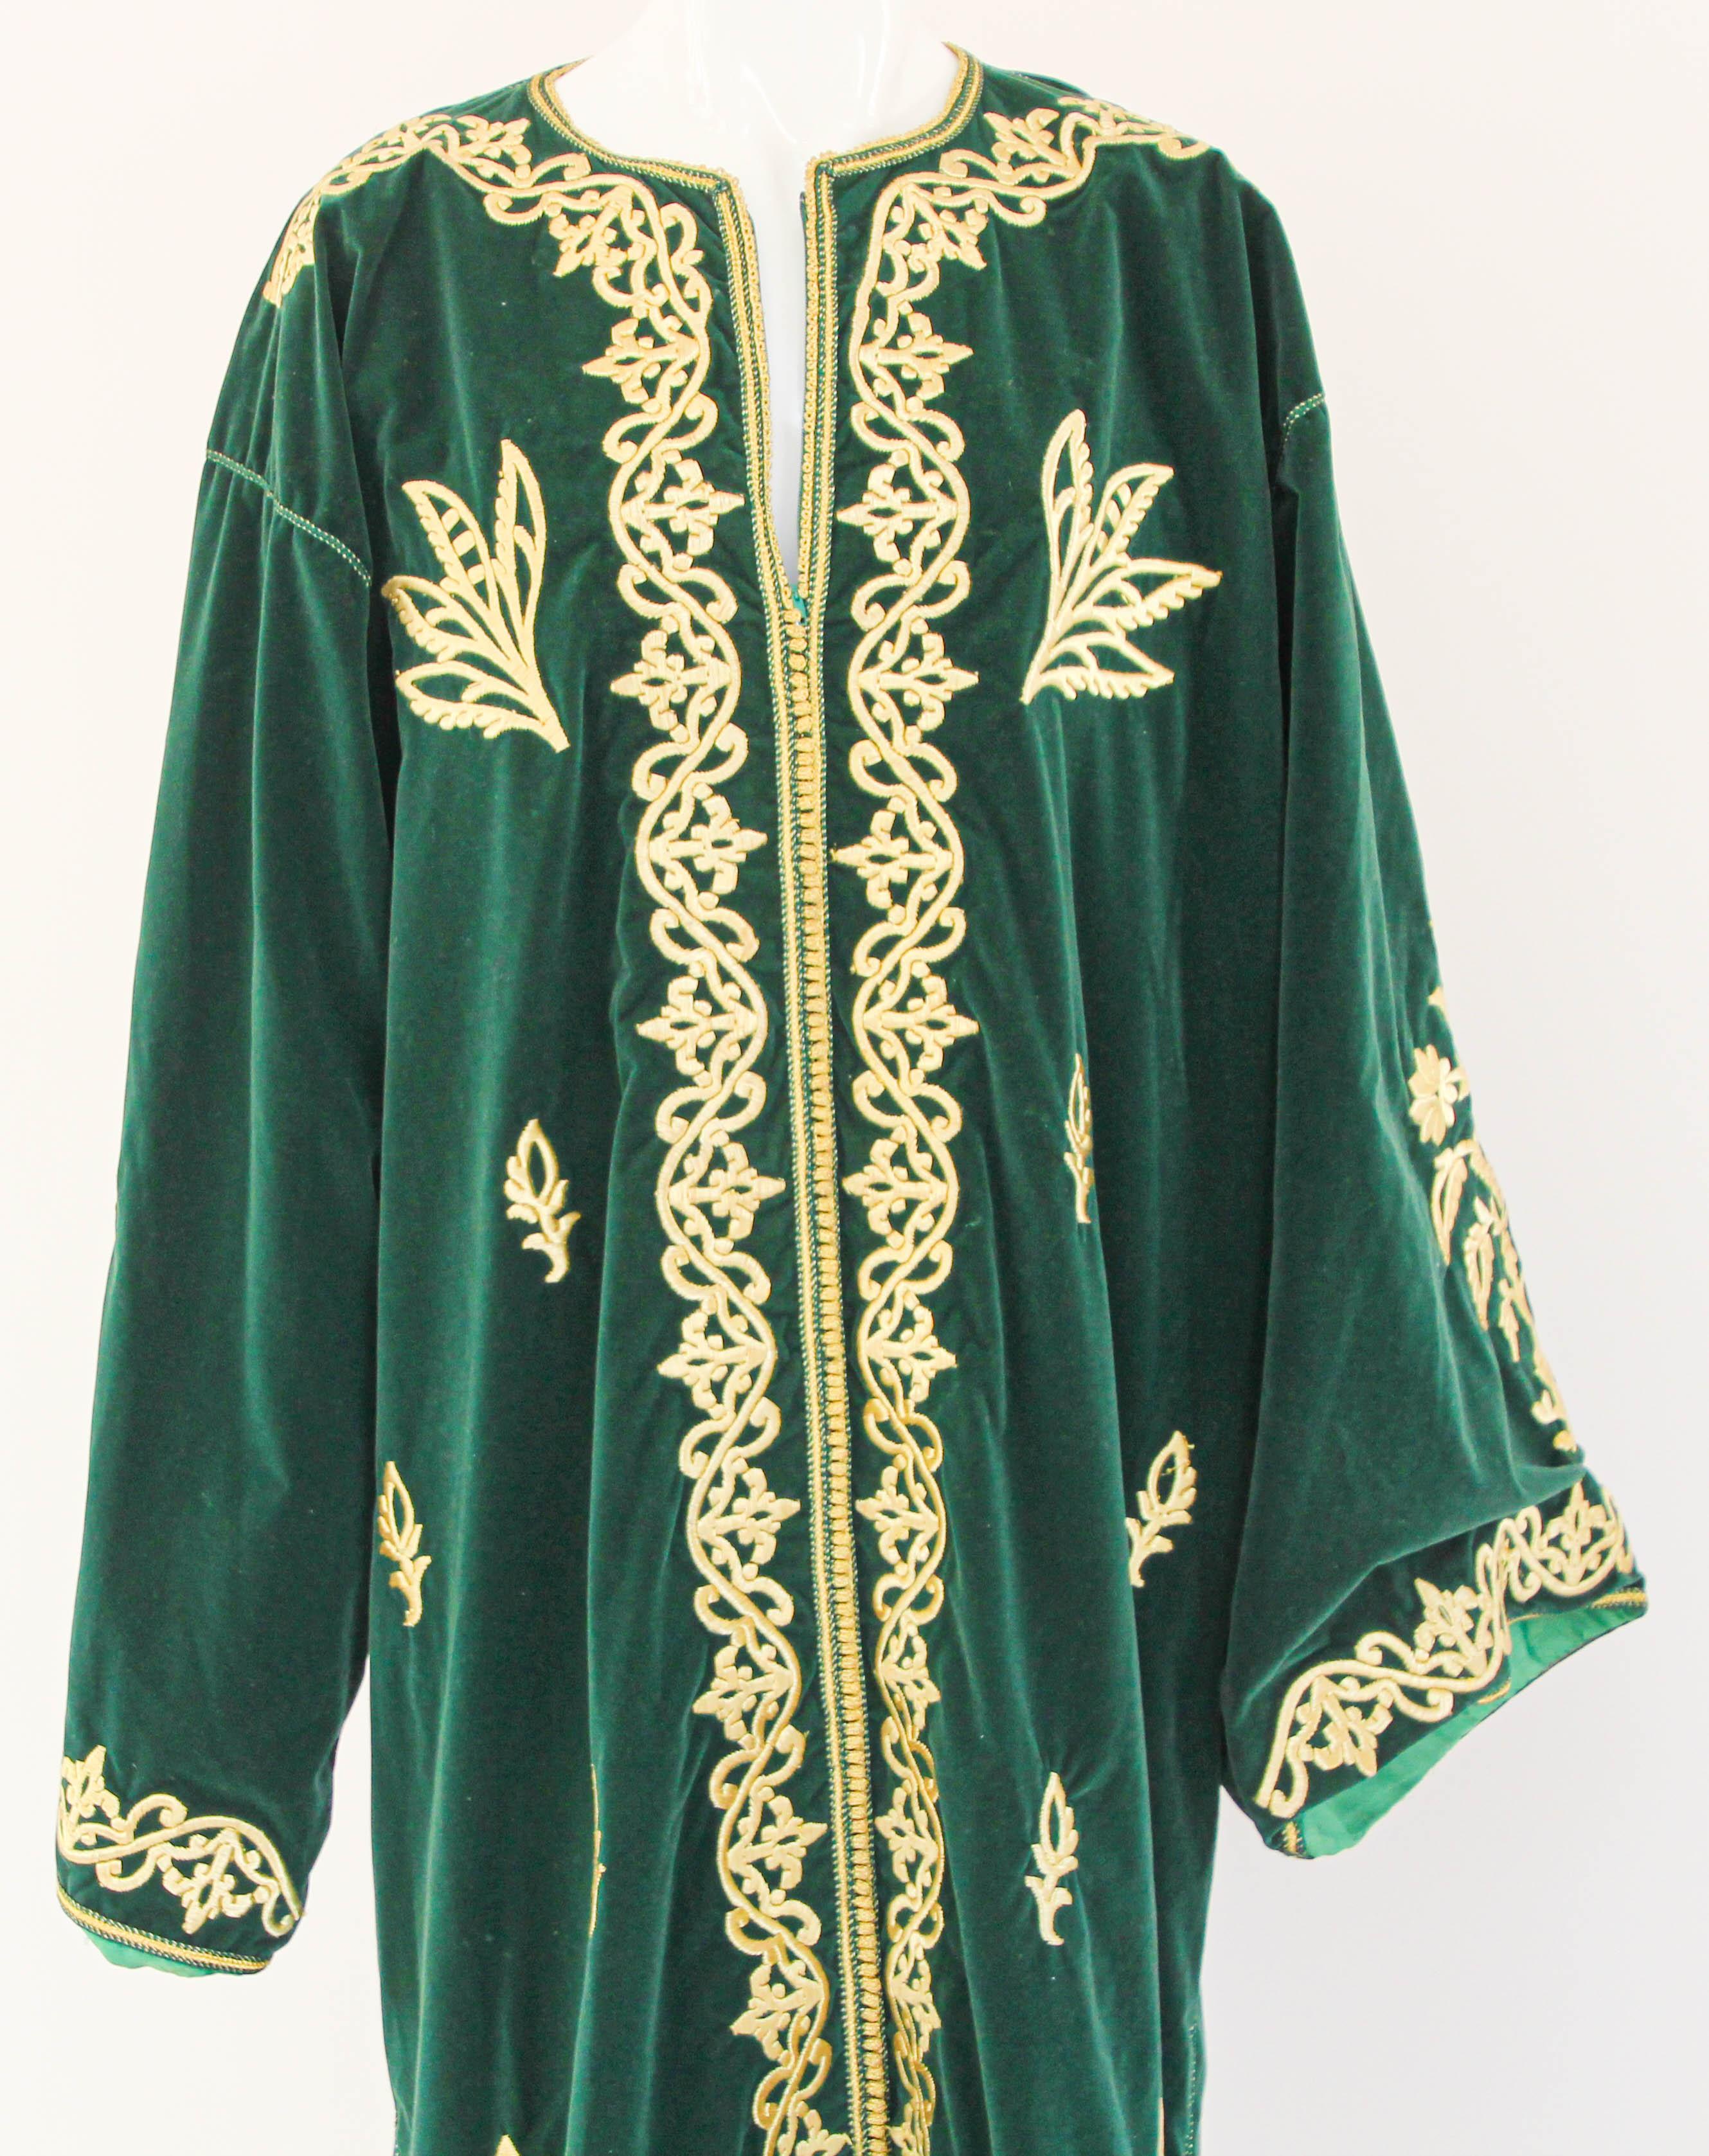 1960s Vintage Moroccan Velvet Caftan Emerald Green and Gold Thread In Good Condition For Sale In North Hollywood, CA